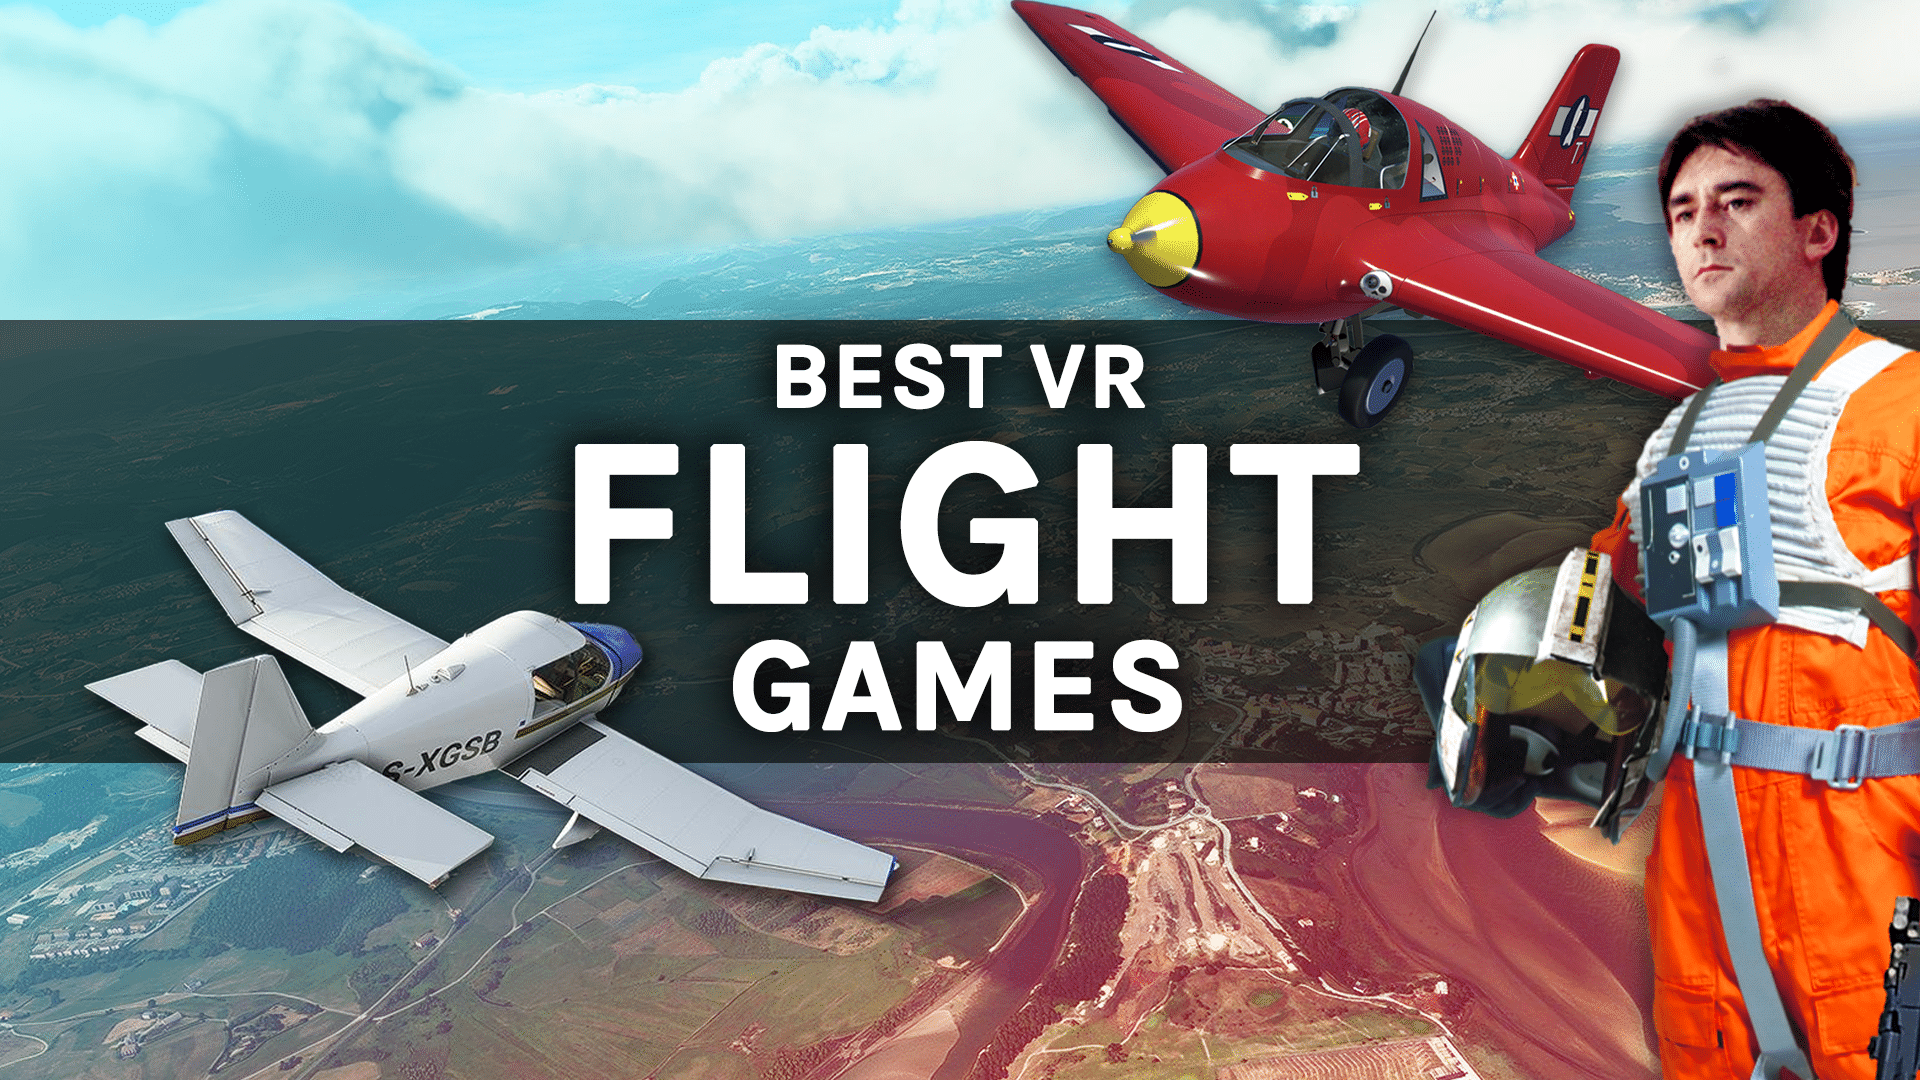 Best VR Flight Games Simulators and Arcade Titles On Quest 2, PSVR and PC VR